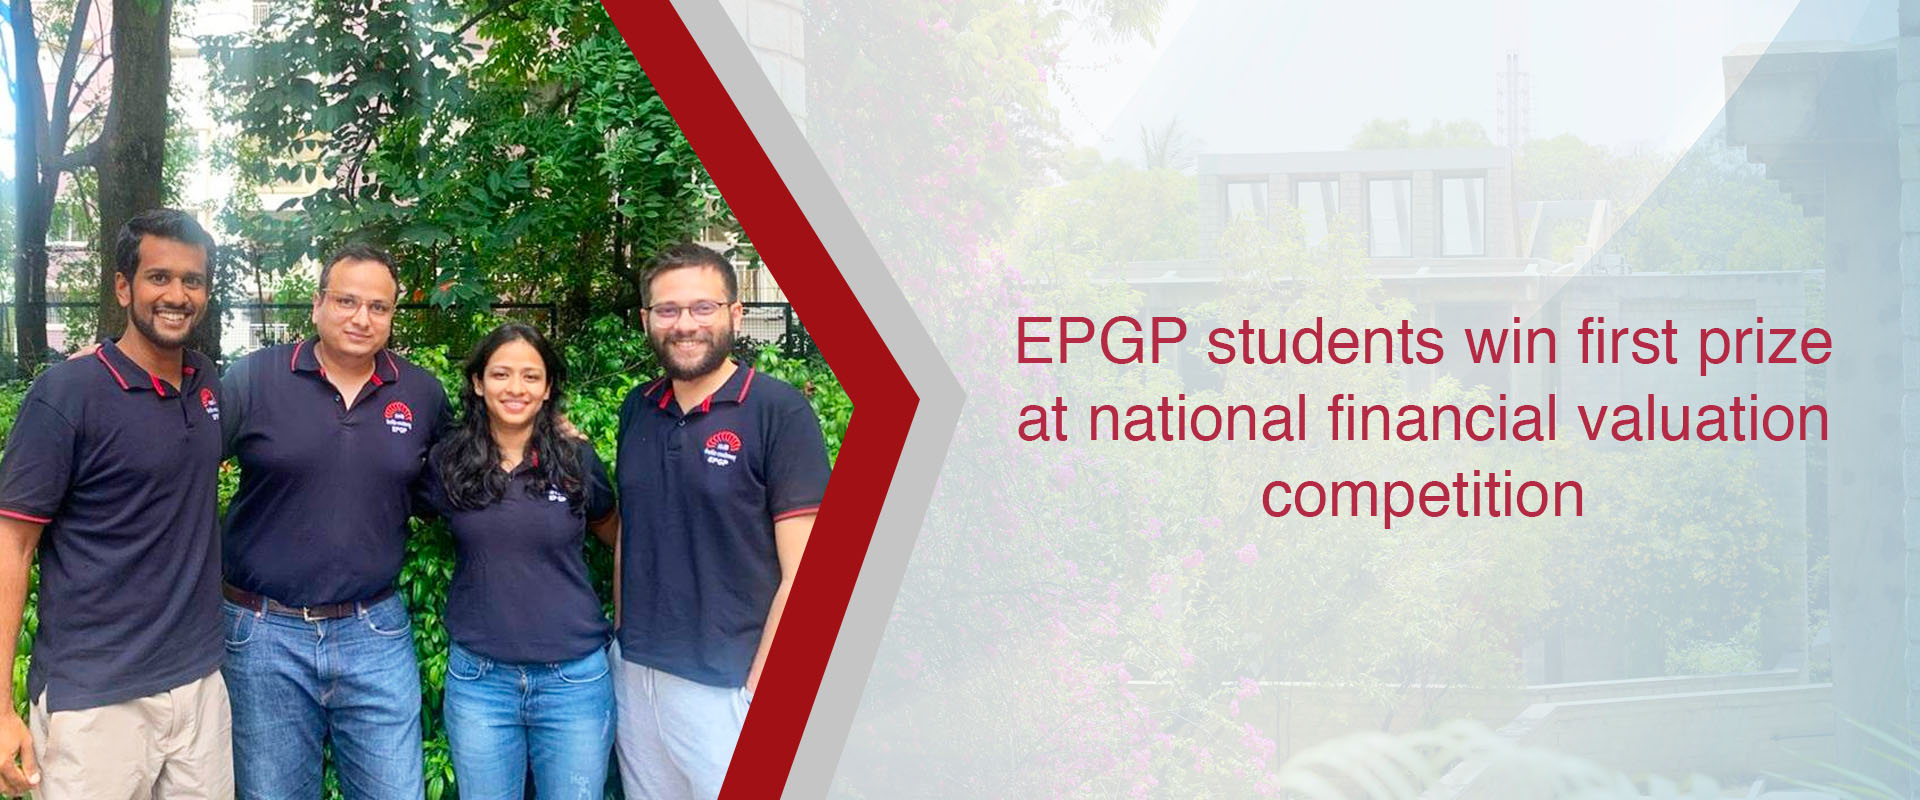 EPGP students win first prize at national financial valuation competition